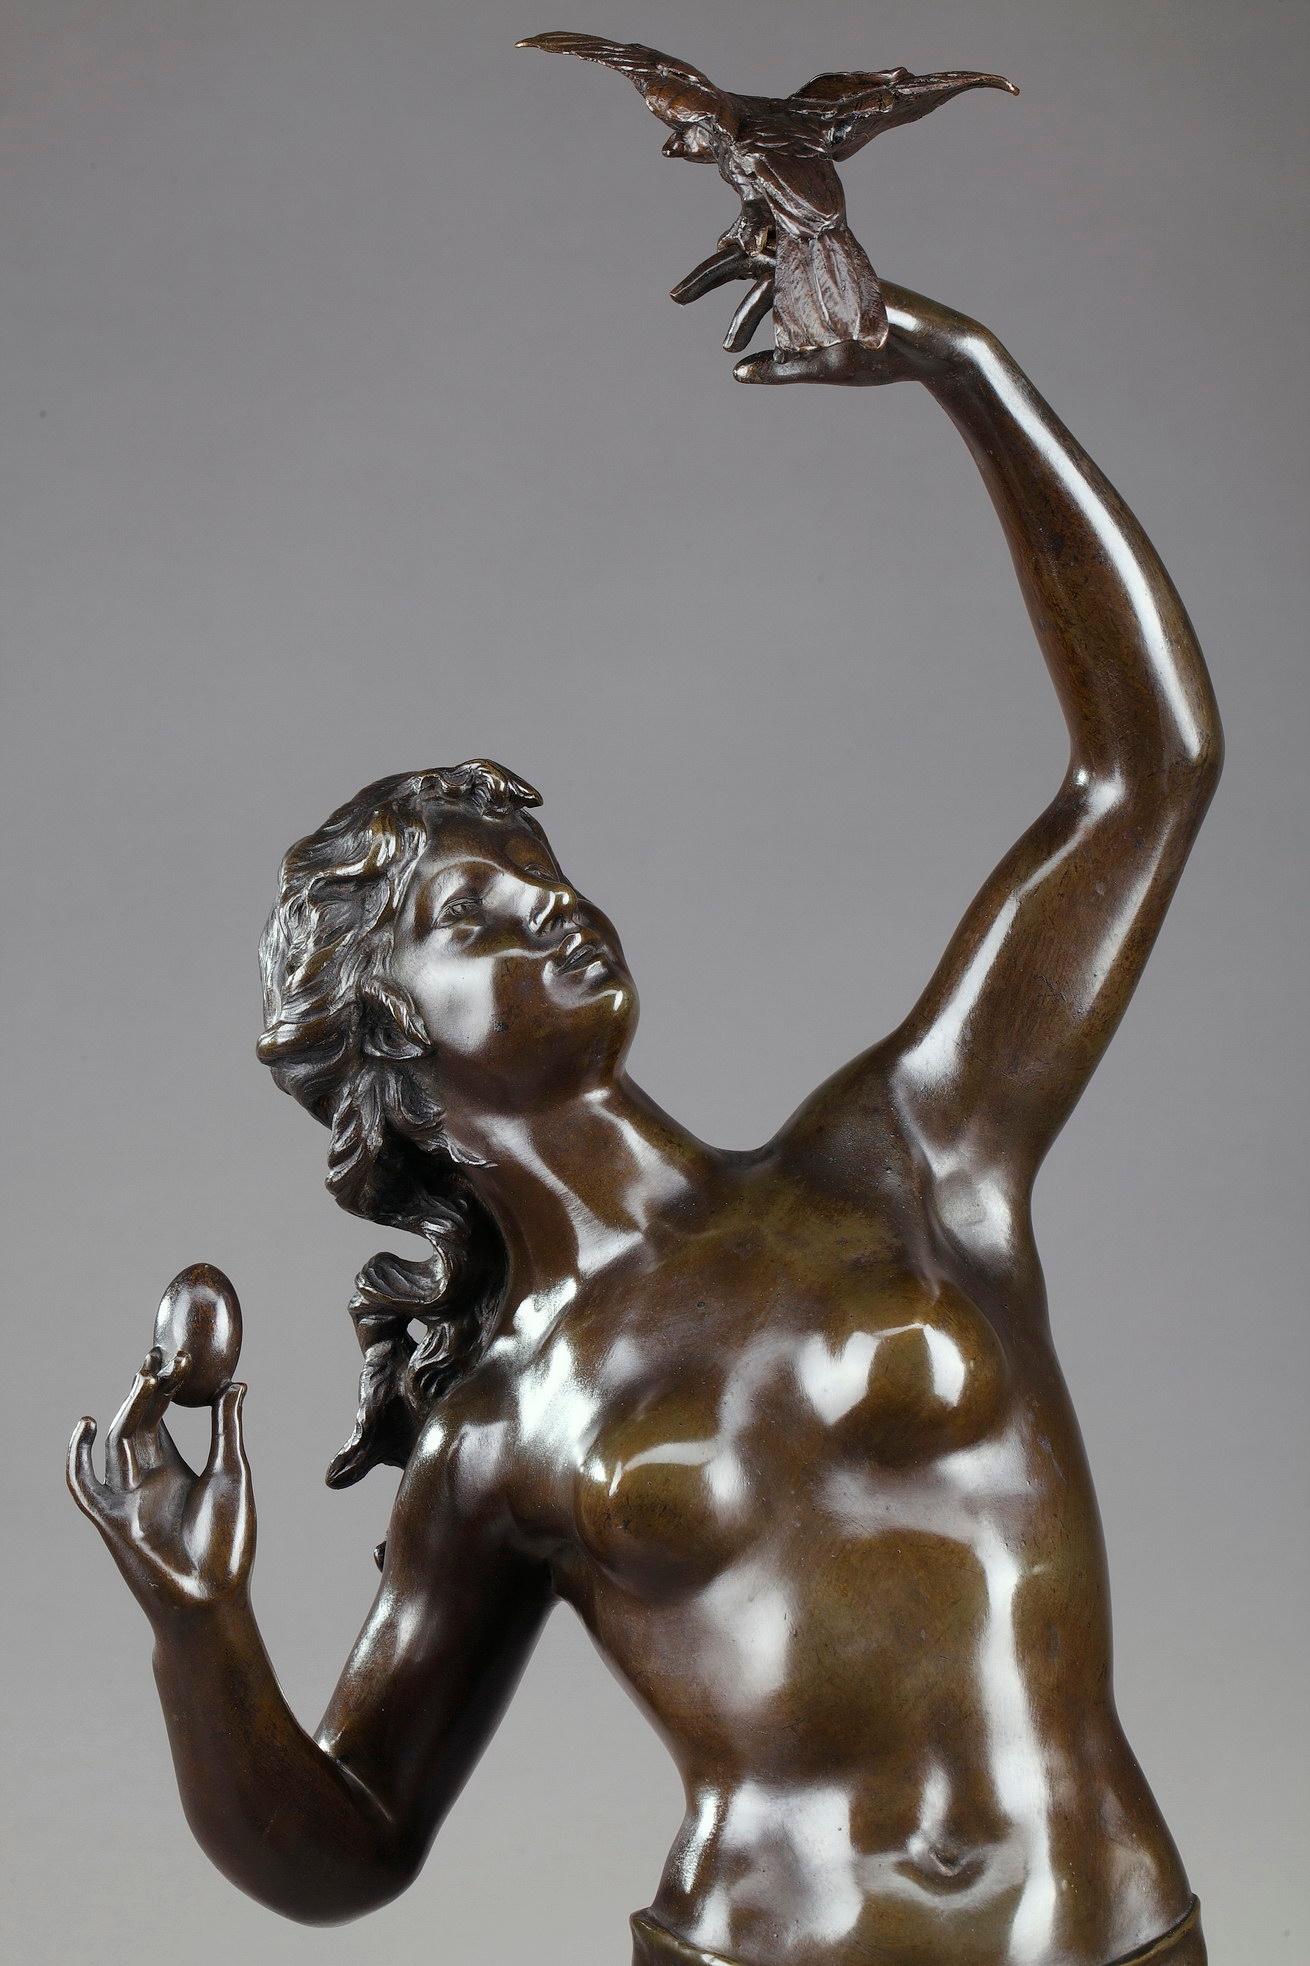 Large bronze figure with brown patina featuring a young woman holding a parrot on her arm. In the other hand she is holding an egg. The parrot trainer rests on a small base signed: Drouot. Antique cast, late 19th century period,

circa